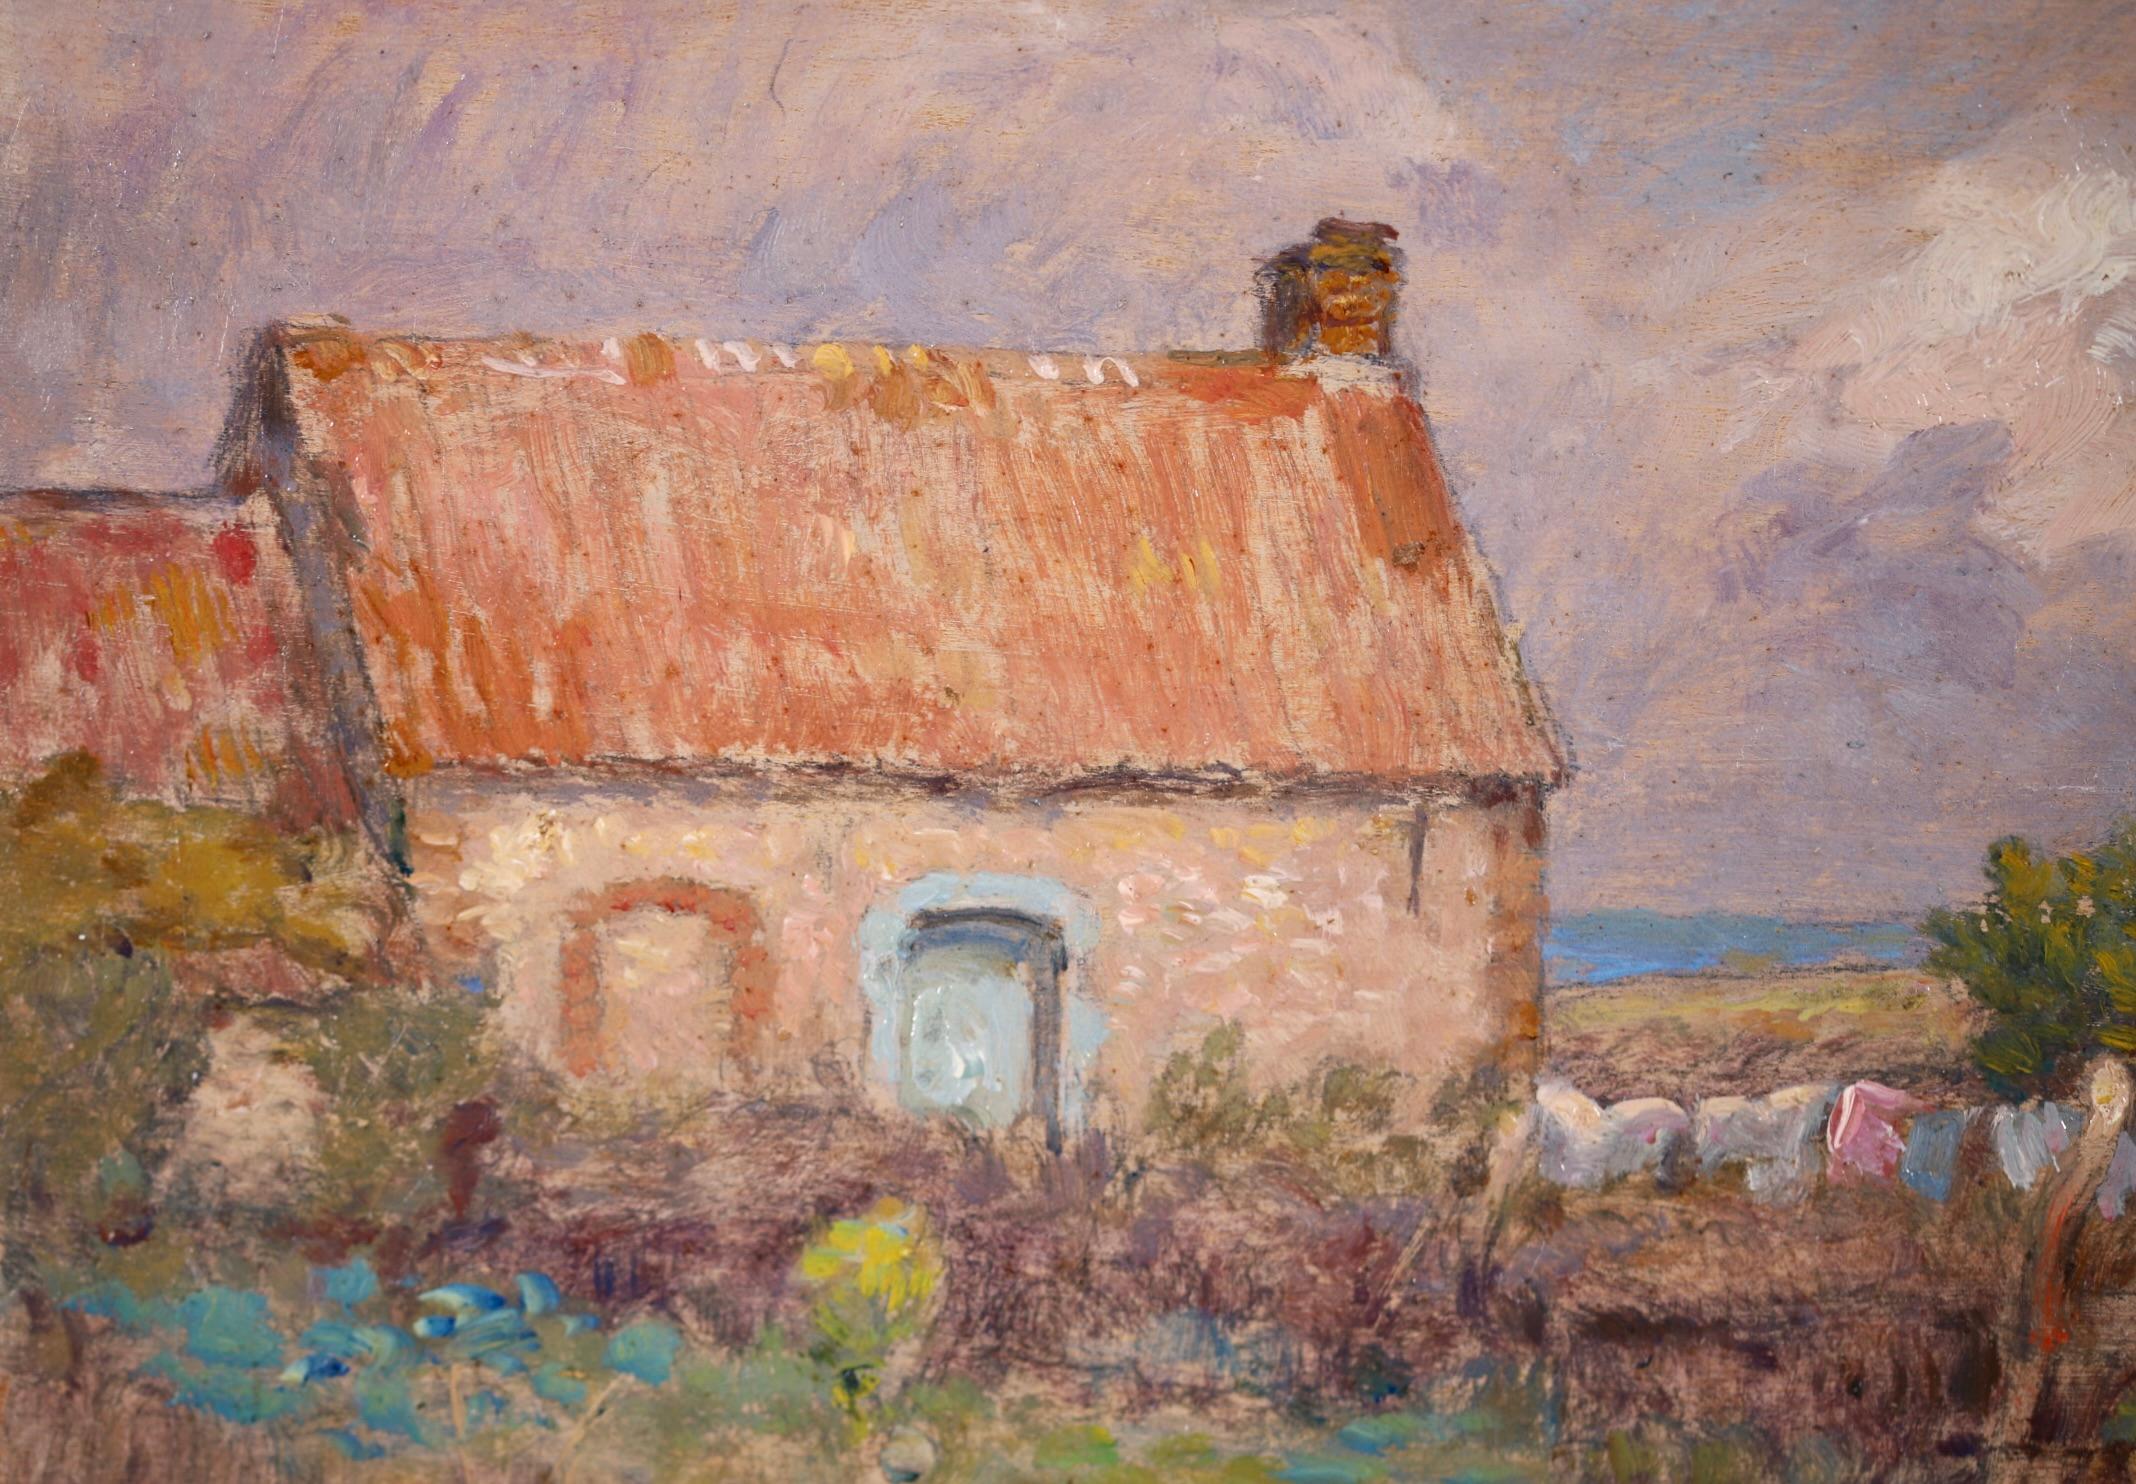 Drying Washing - French Impressionist Oil, Cottage in Landscape by Marie Duhem 7